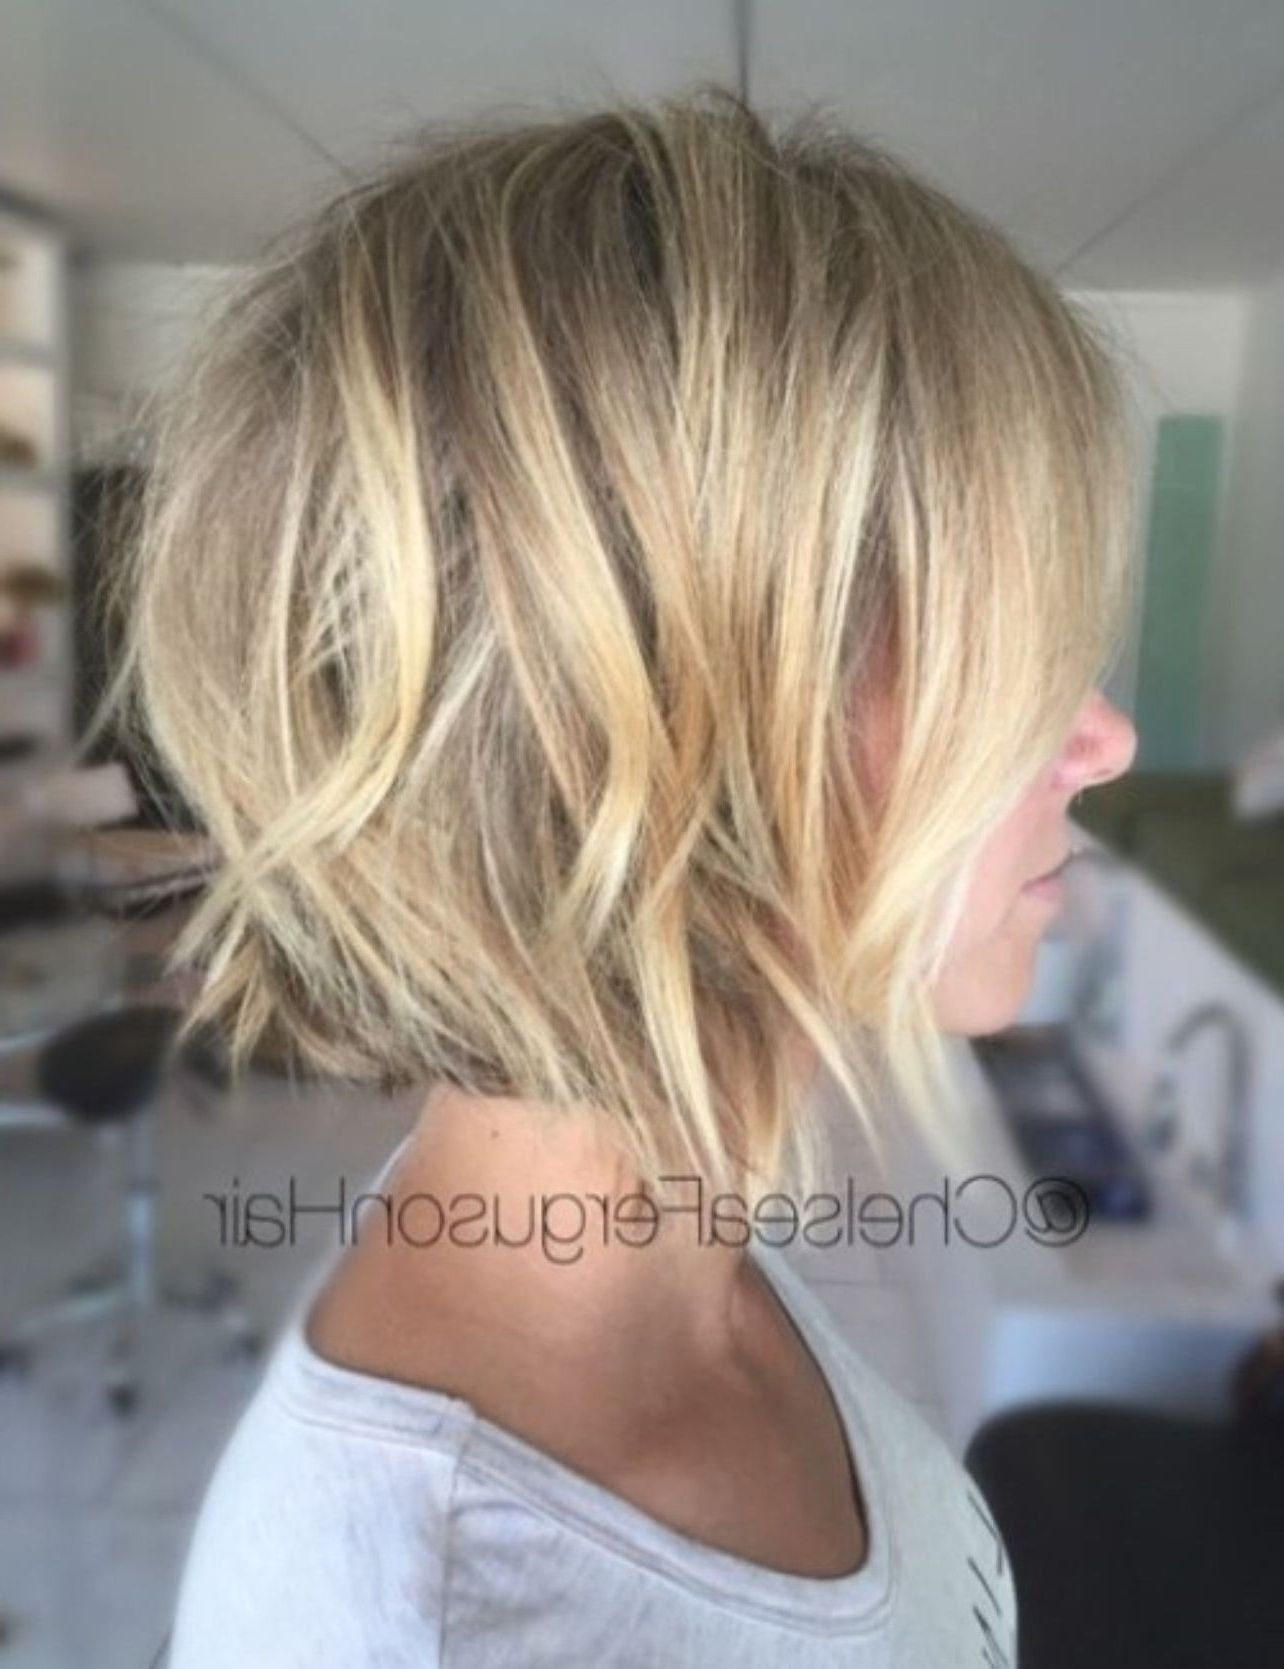 Trendy Texturized Tousled Bob  Hairstyles Throughout Pin On Hairstyles/cuts (View 1 of 20)